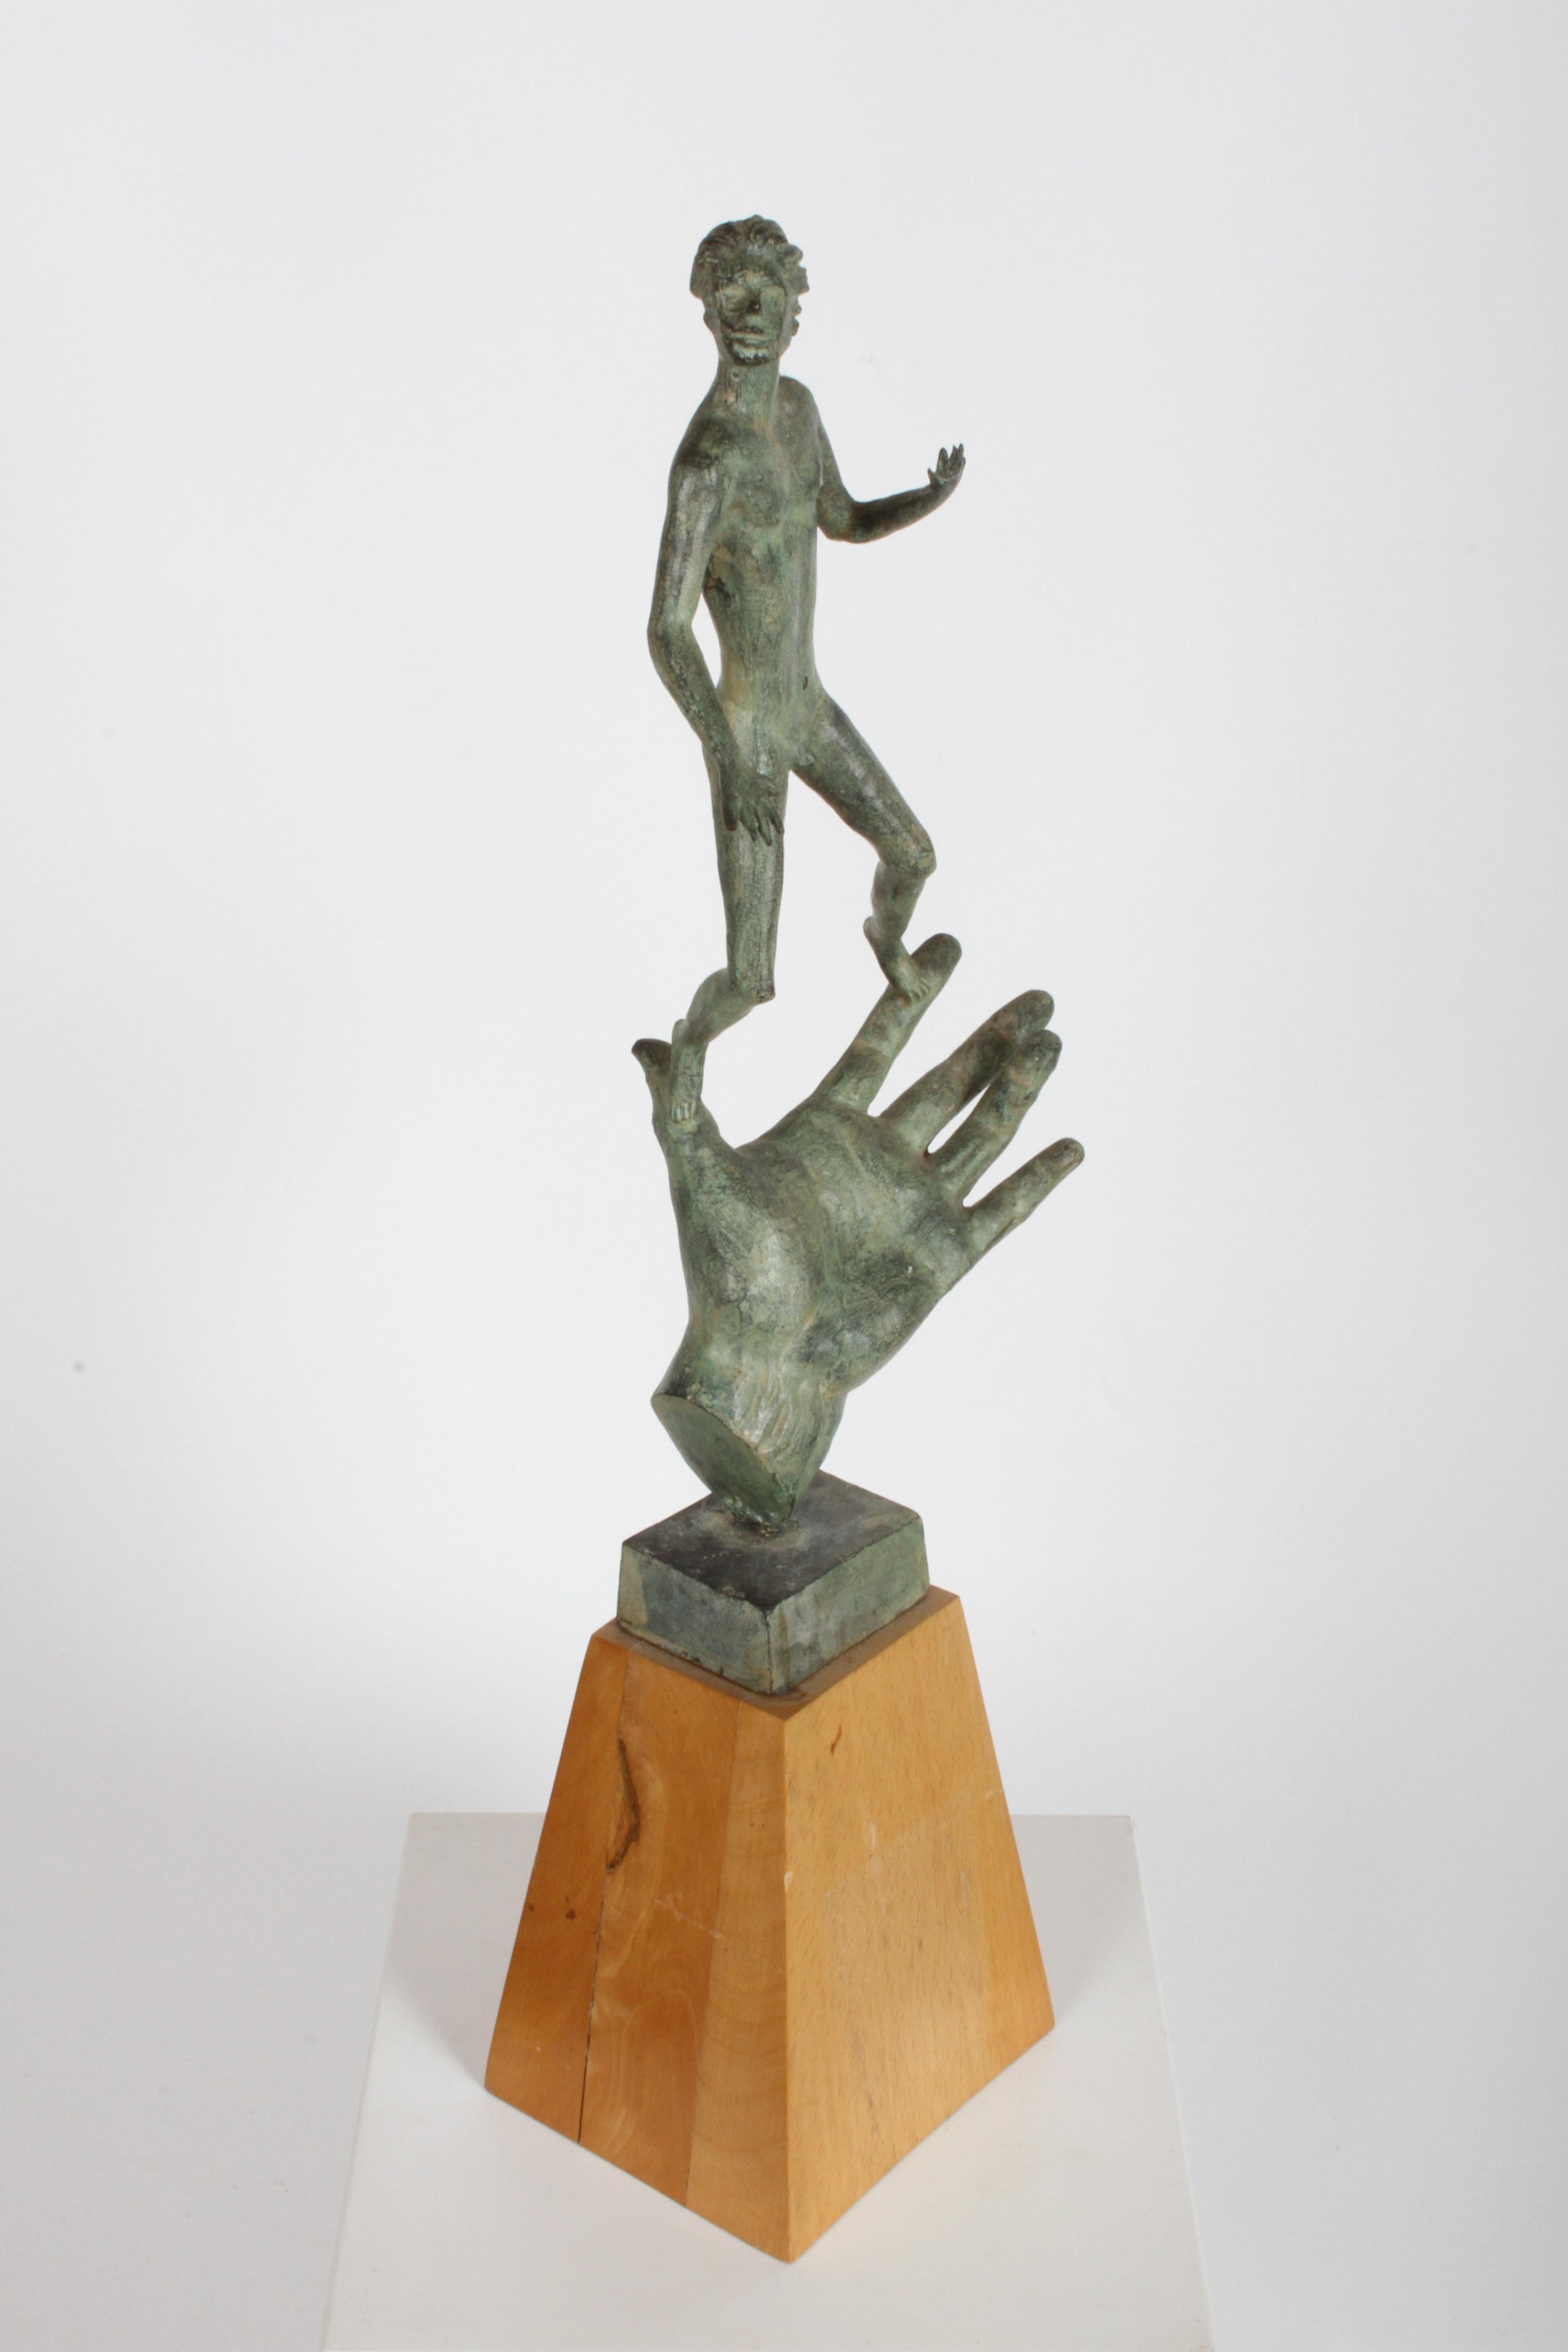 After Carl Milles (1875-1955) sculptor, bronze sculpture of his hand of god. This was one of three major commissions he received in the 1950s and completed before his death in 1955. It was created to honor Swedish Entrepreneur C.E. Johansson, the